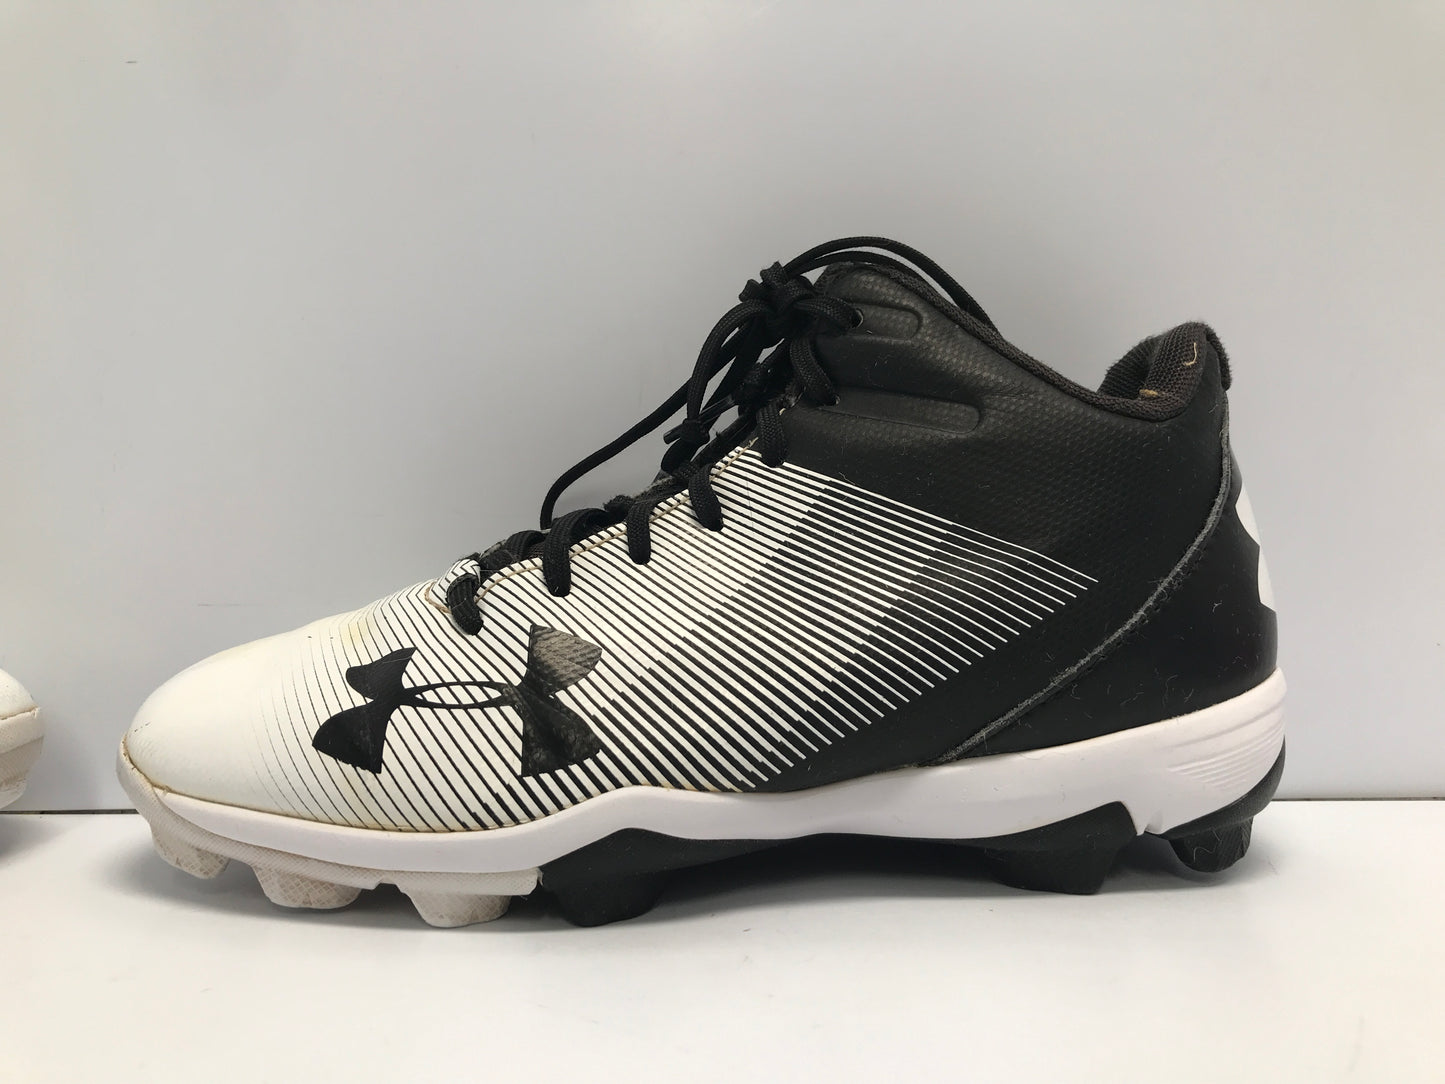 Baseball Shoes Cleats Child Size 4 Under Armour Black White High Tops